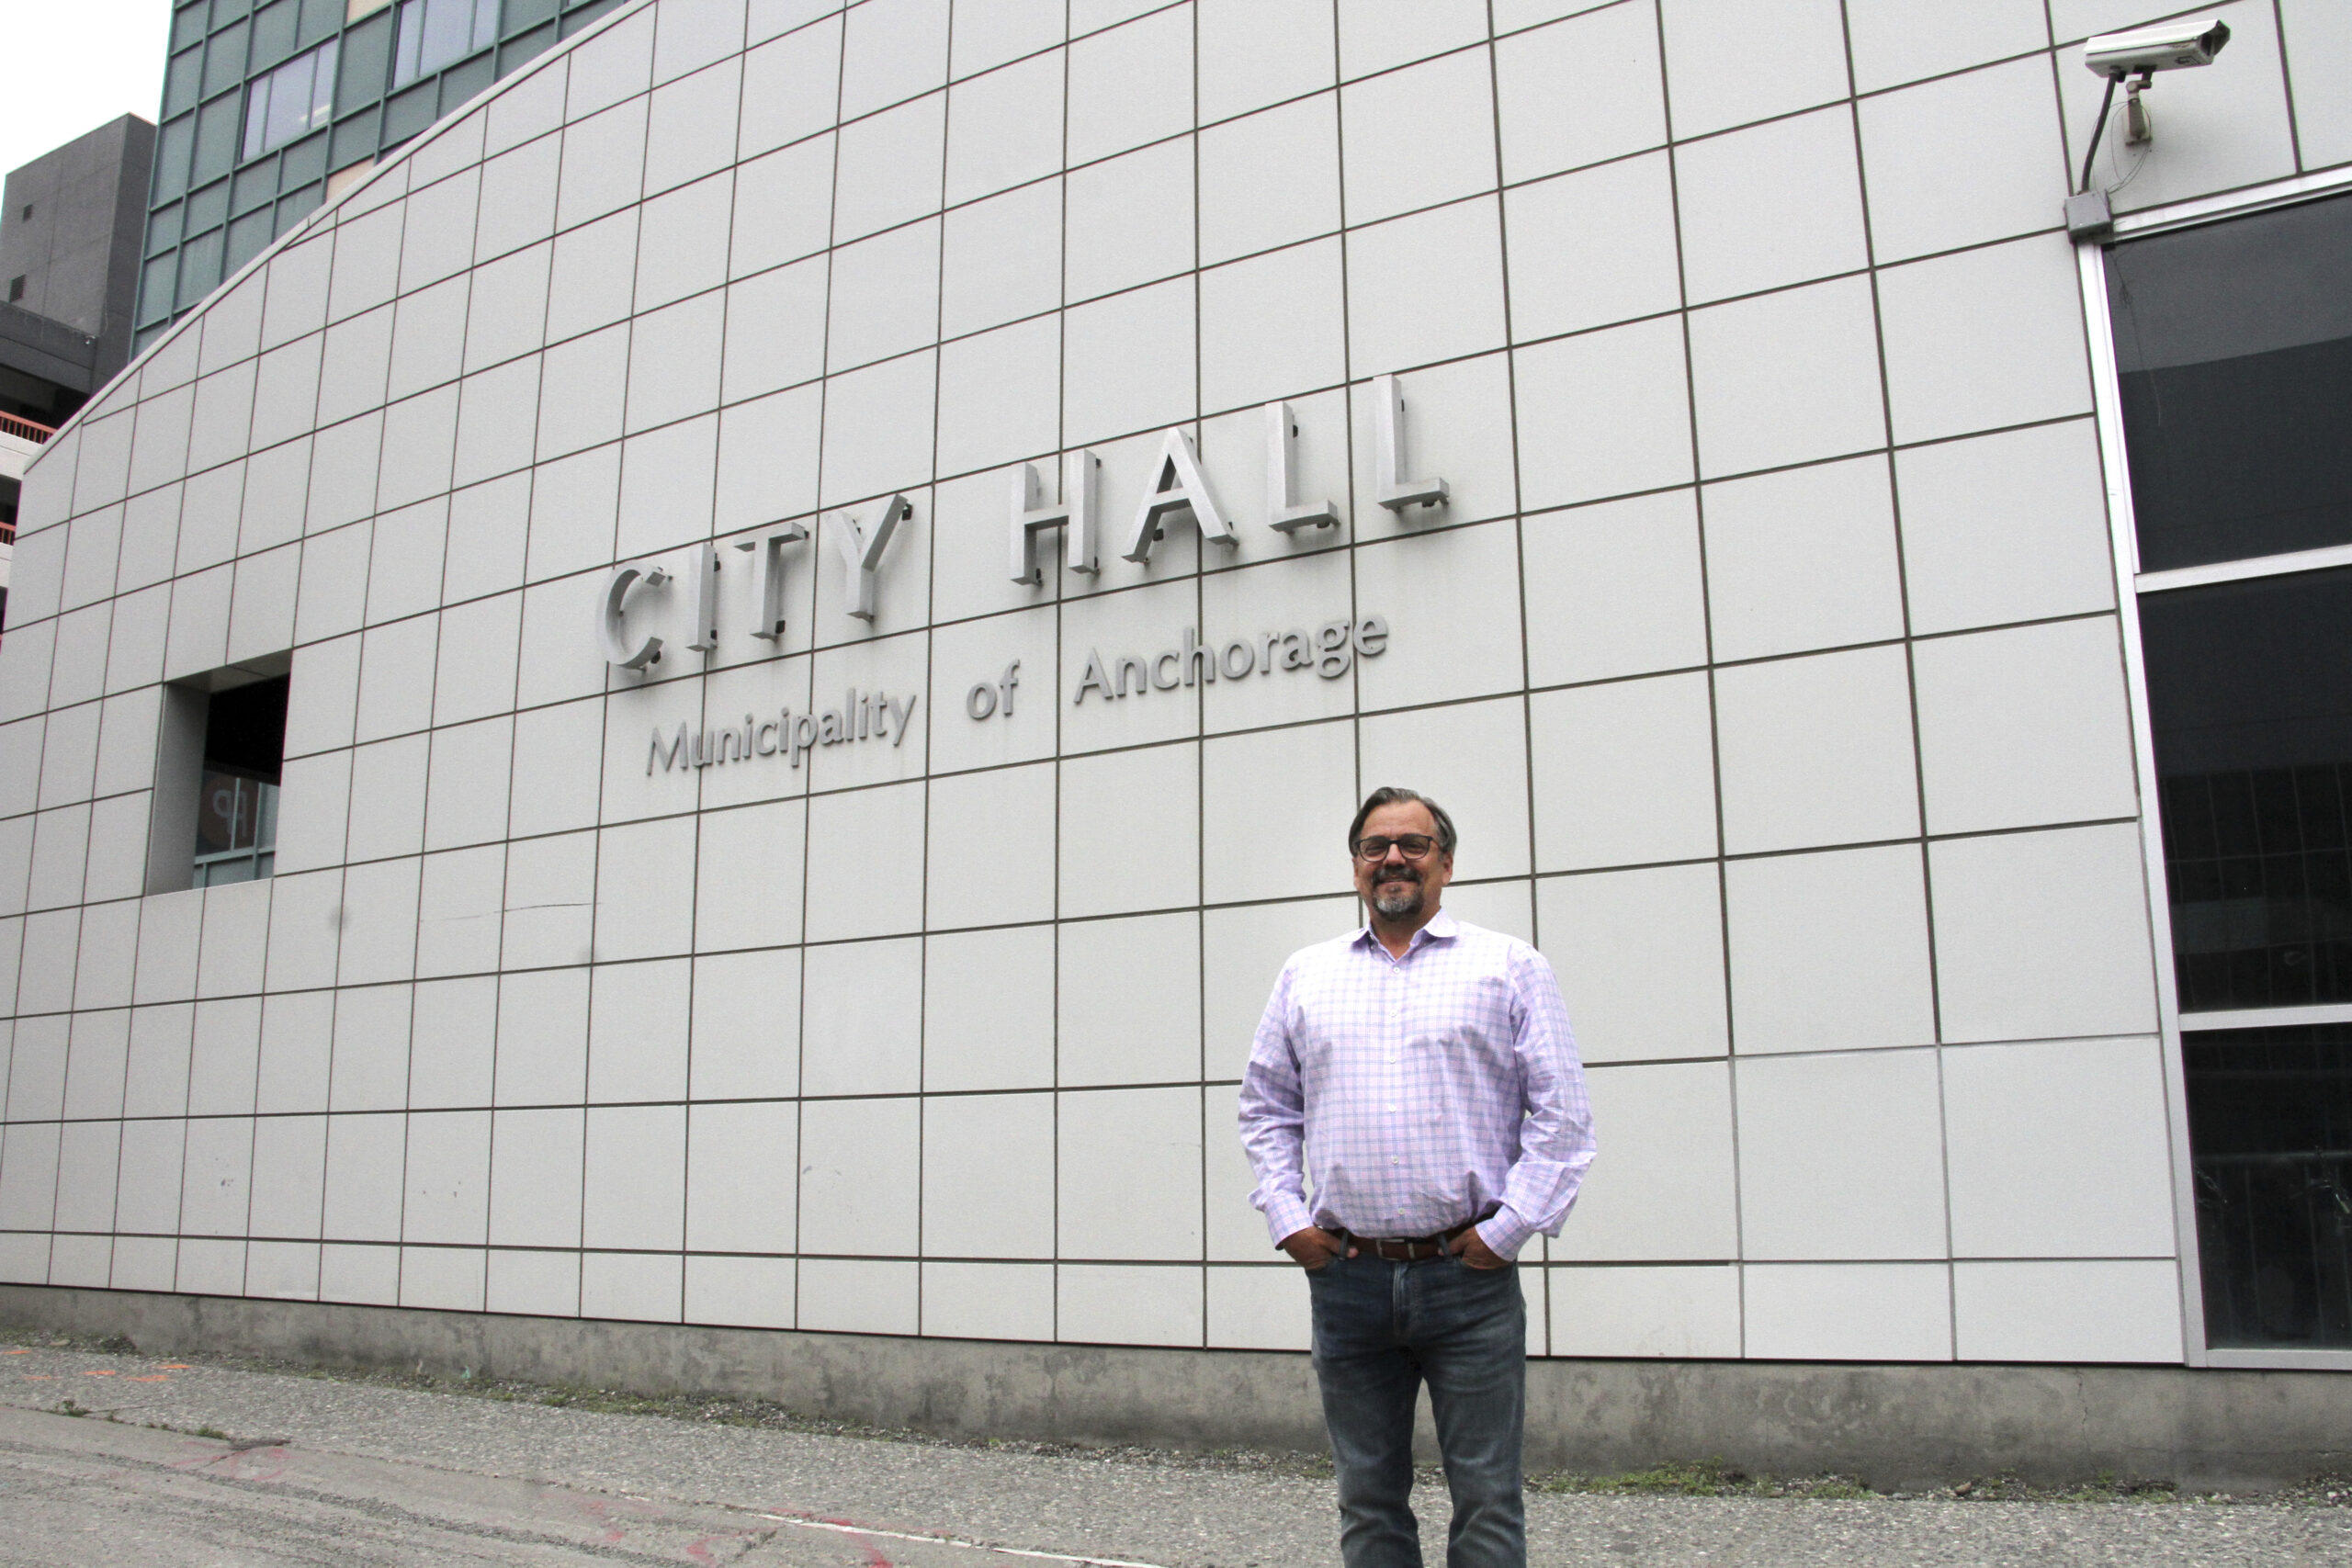 a man poses for a photo in front of city hall